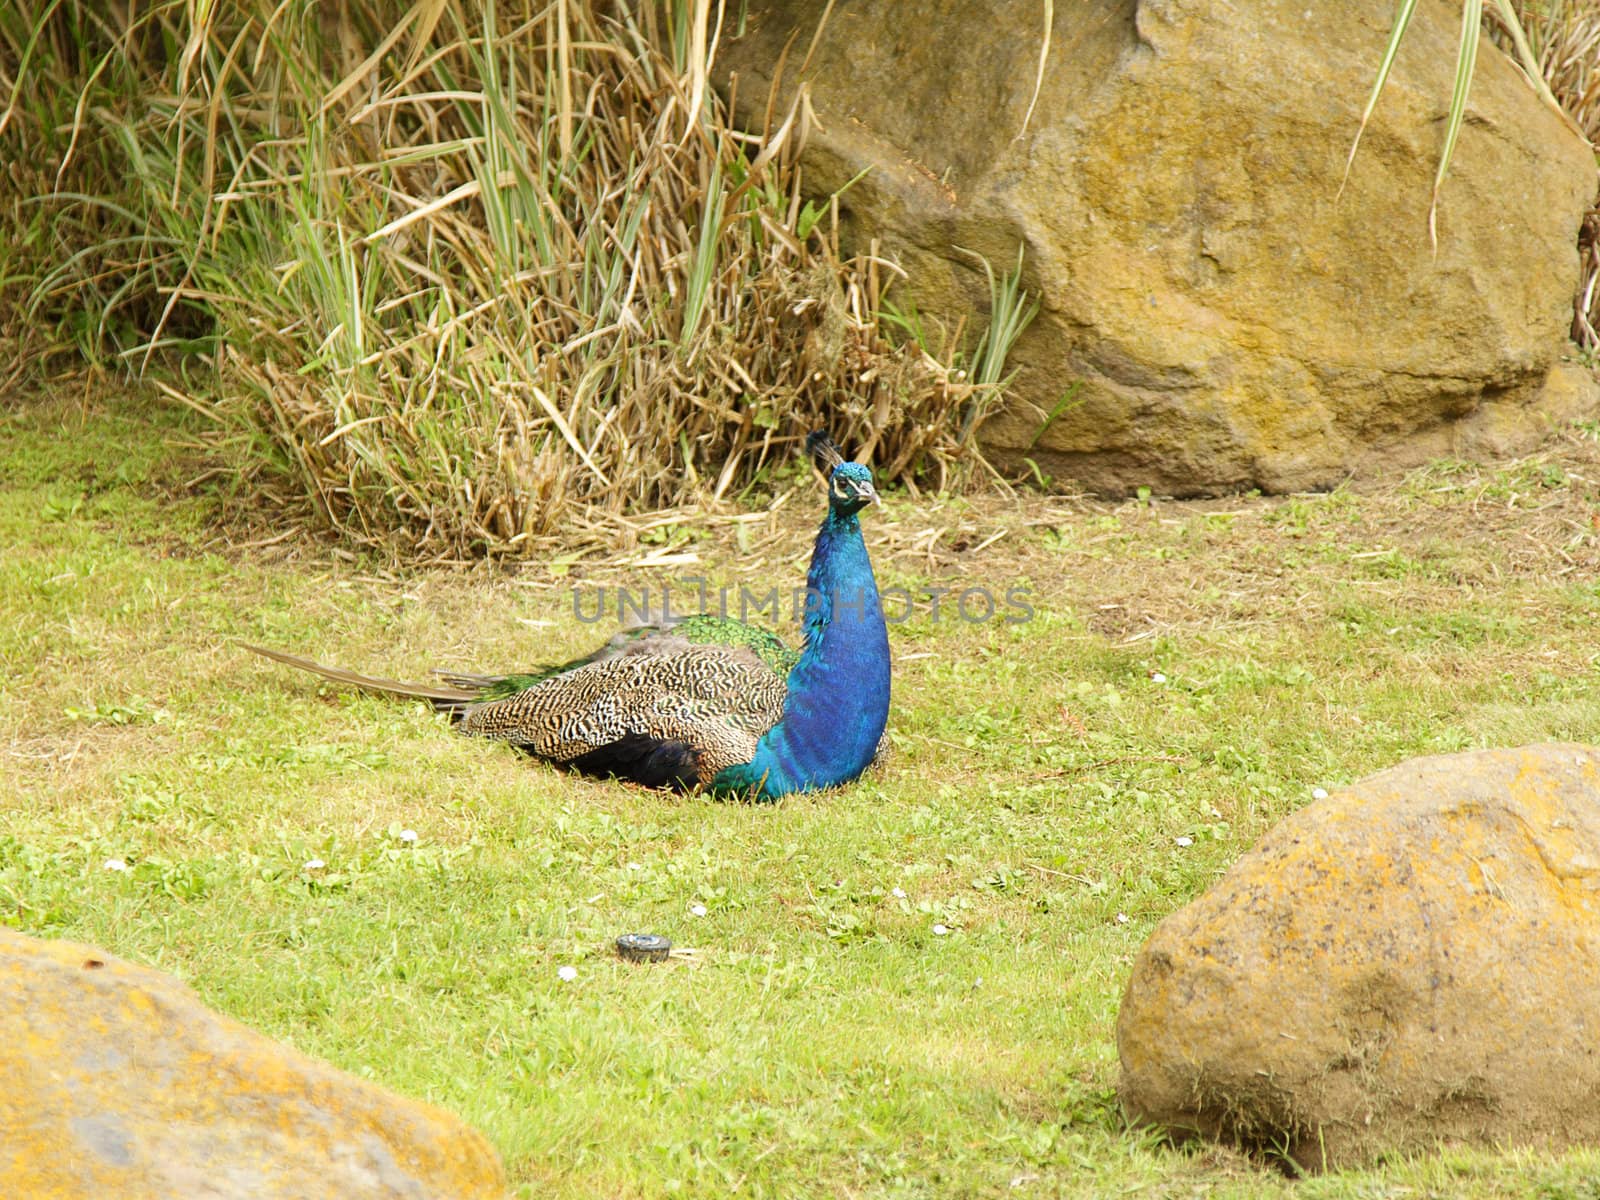 A photo of a peacock in the zoo